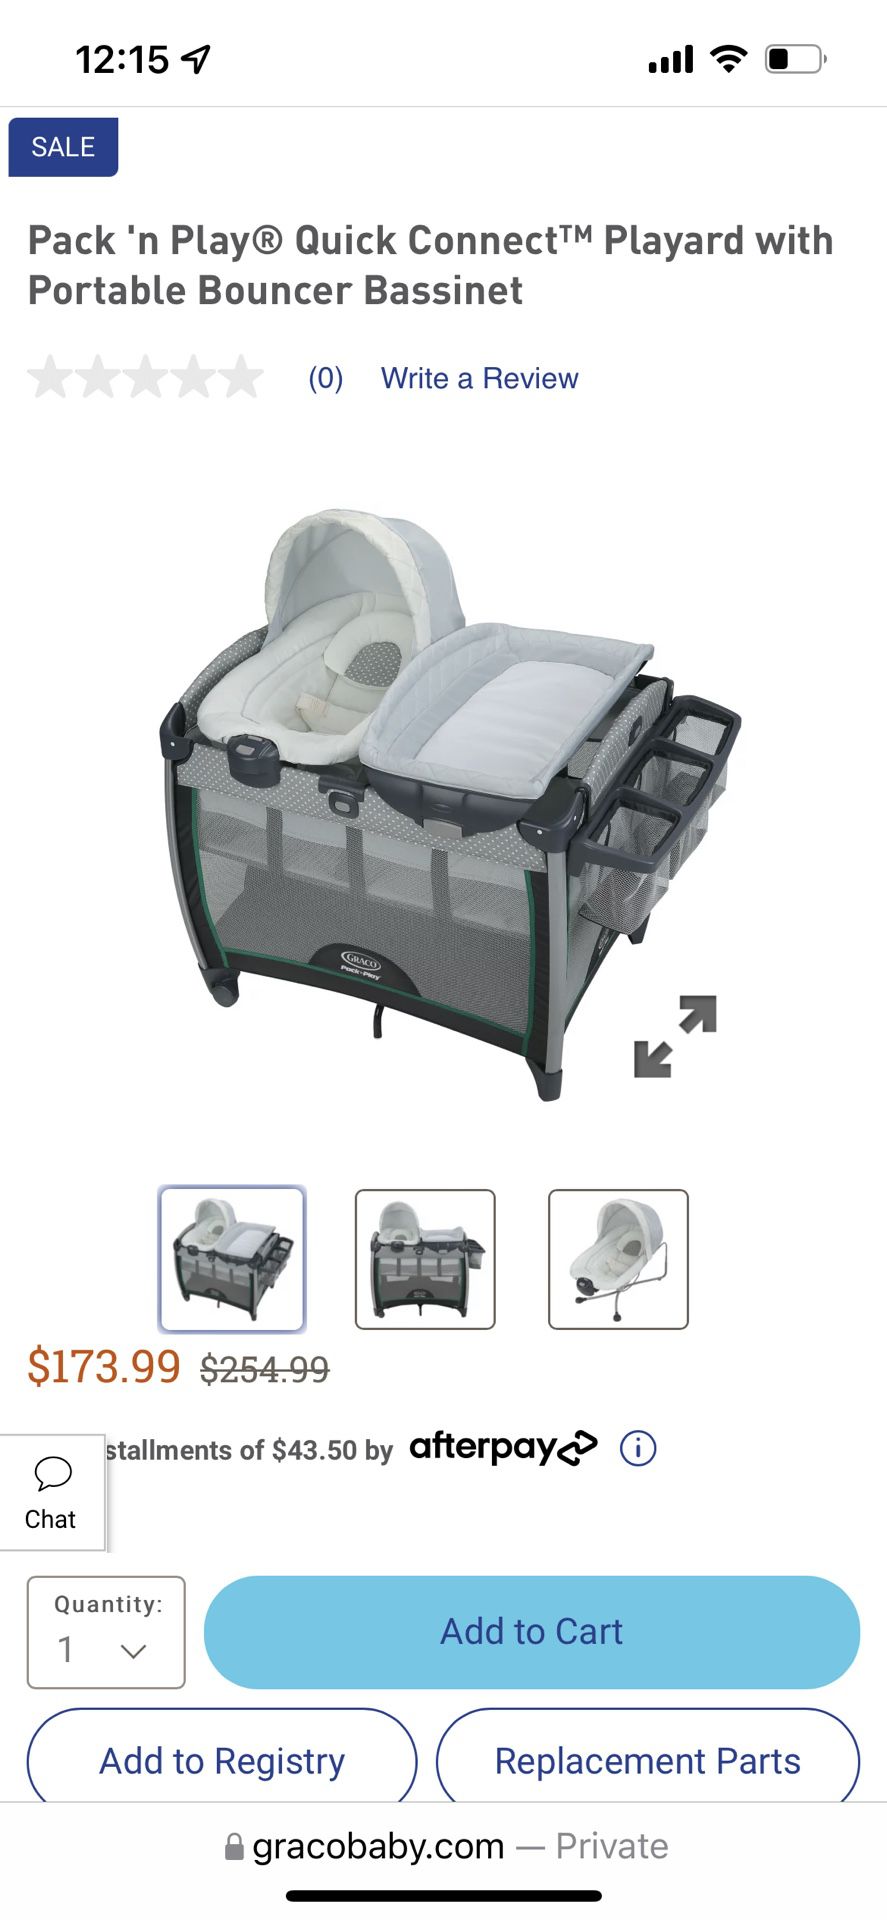 Pack 'n Play® Quick Connect Playard with Portable Bouncer Bassinet